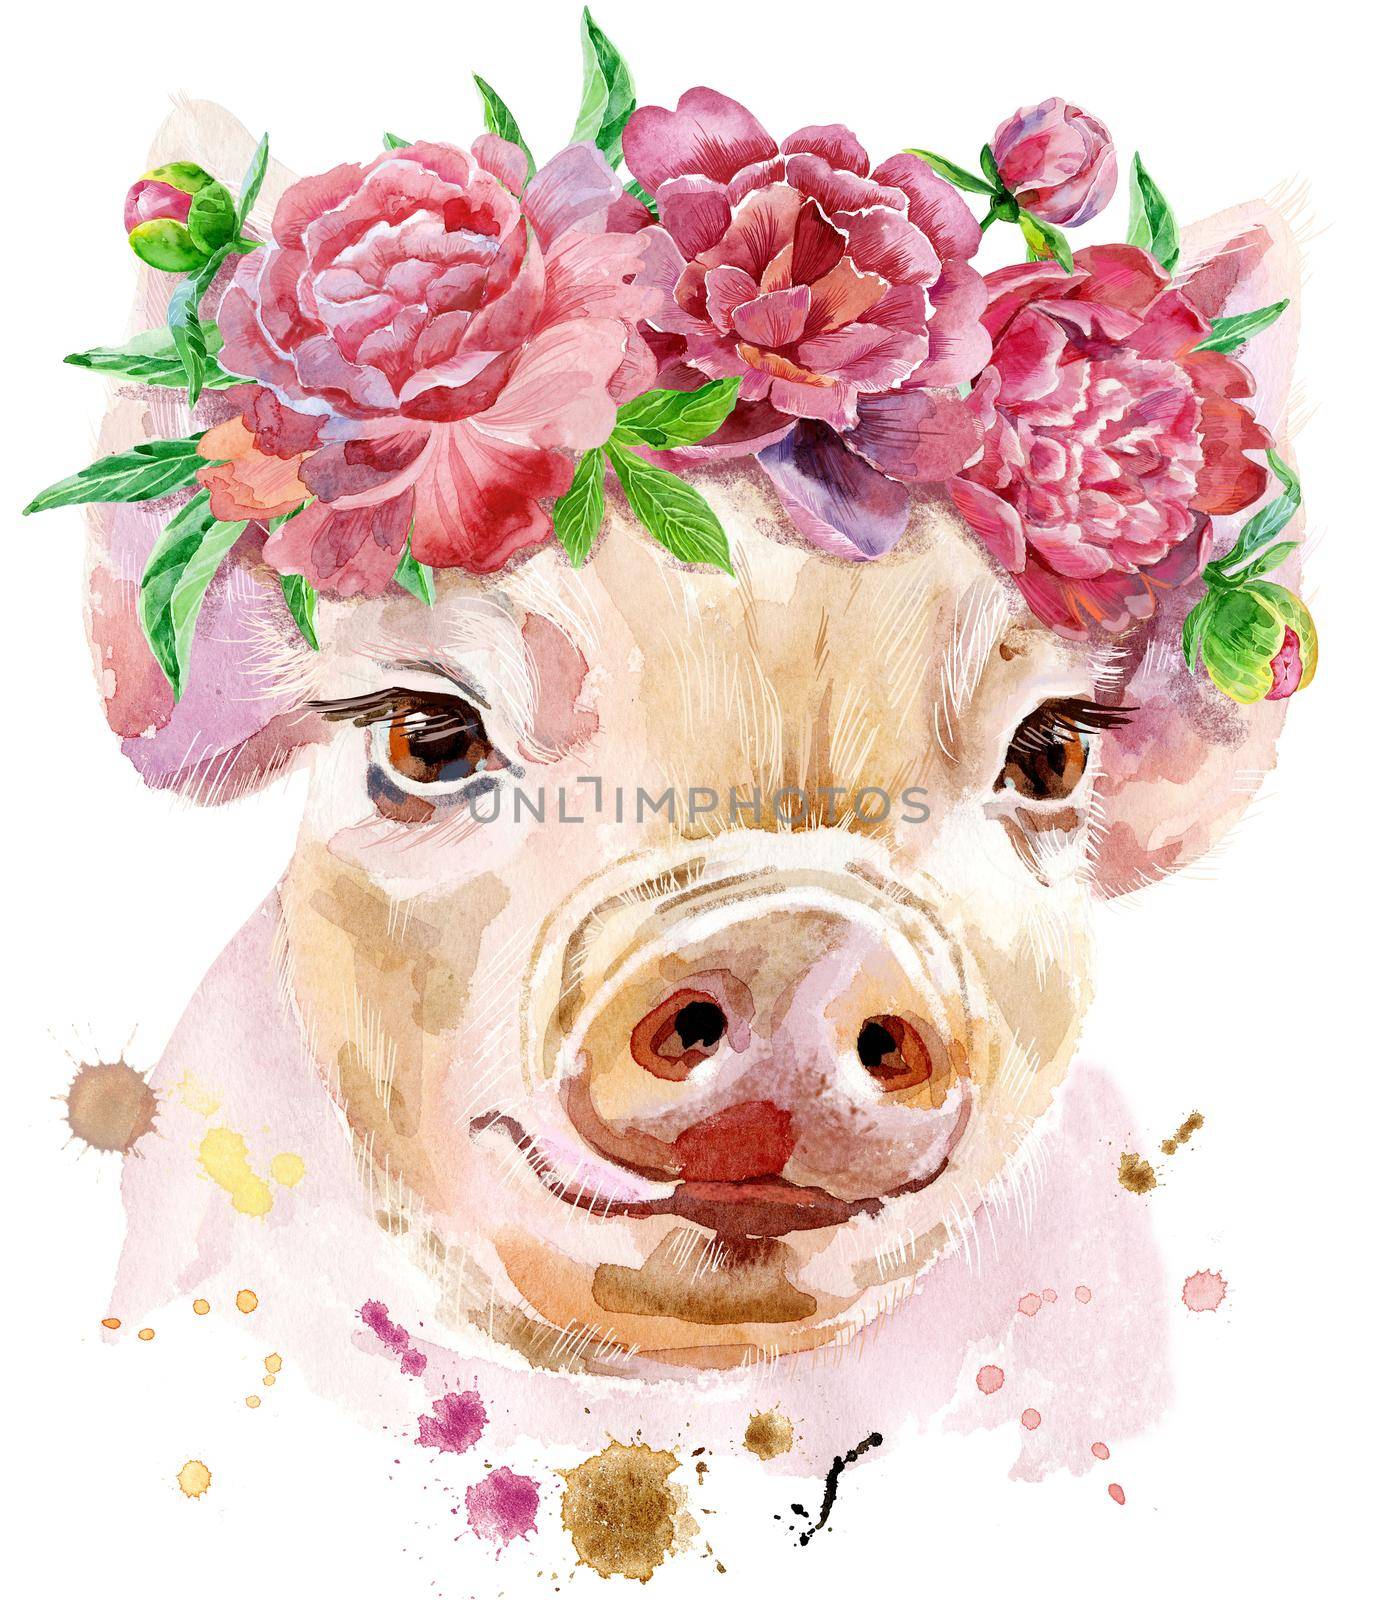 A beautiful pig in a wreath of peonies. Flowers. Watercolor illustration with splashes.